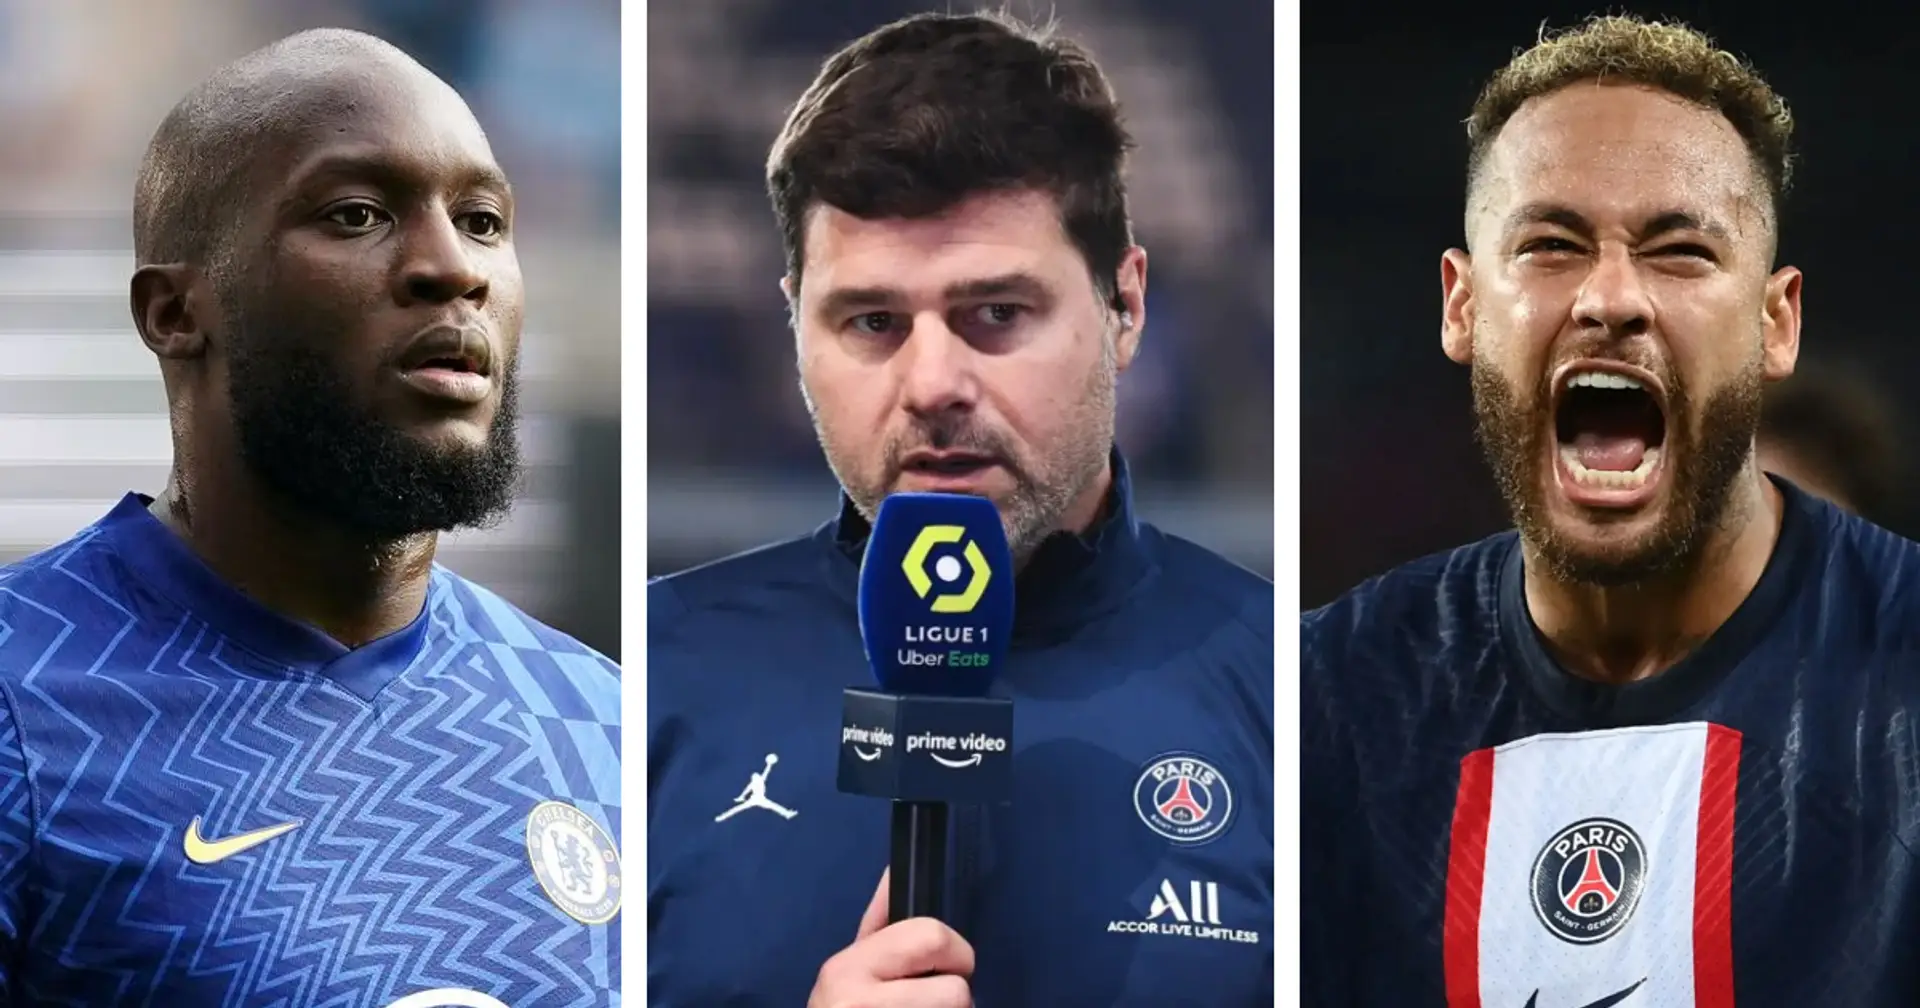 How Chelsea could line up with Lukaku and Neymar under Pochettino's guidance